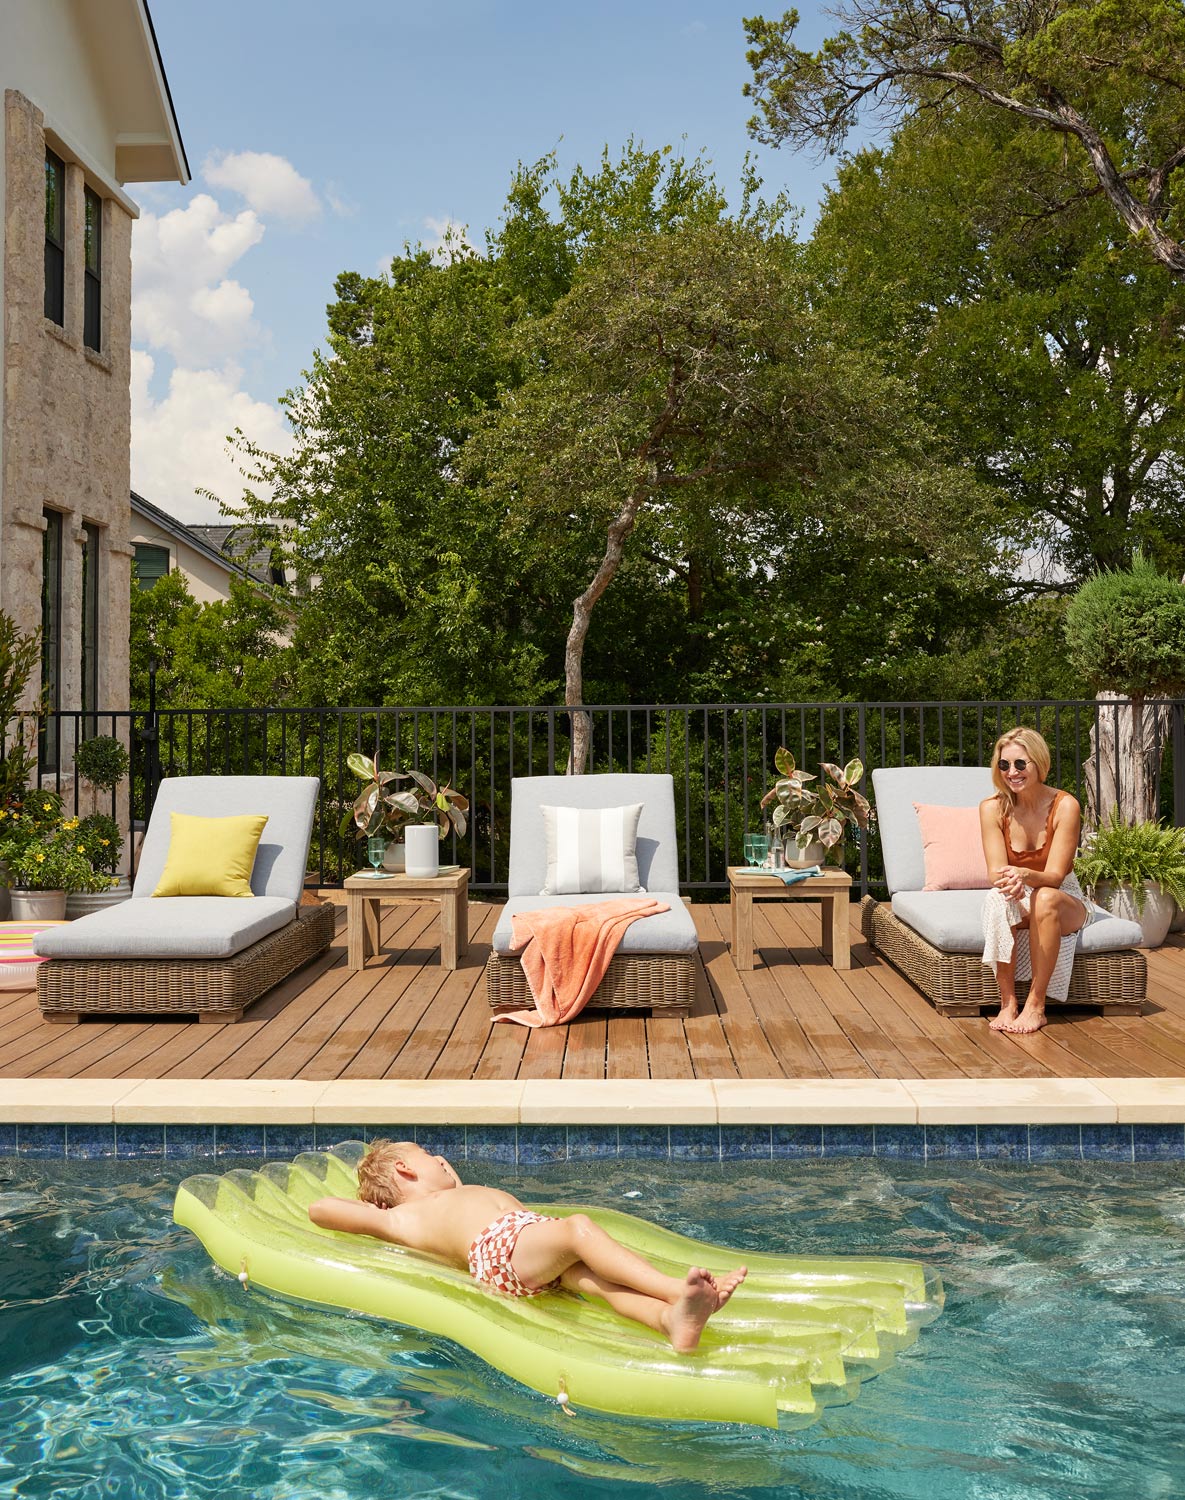 Yardbird outdoor furniture photographed by Austin based lifestyle photographer Buff Strickland